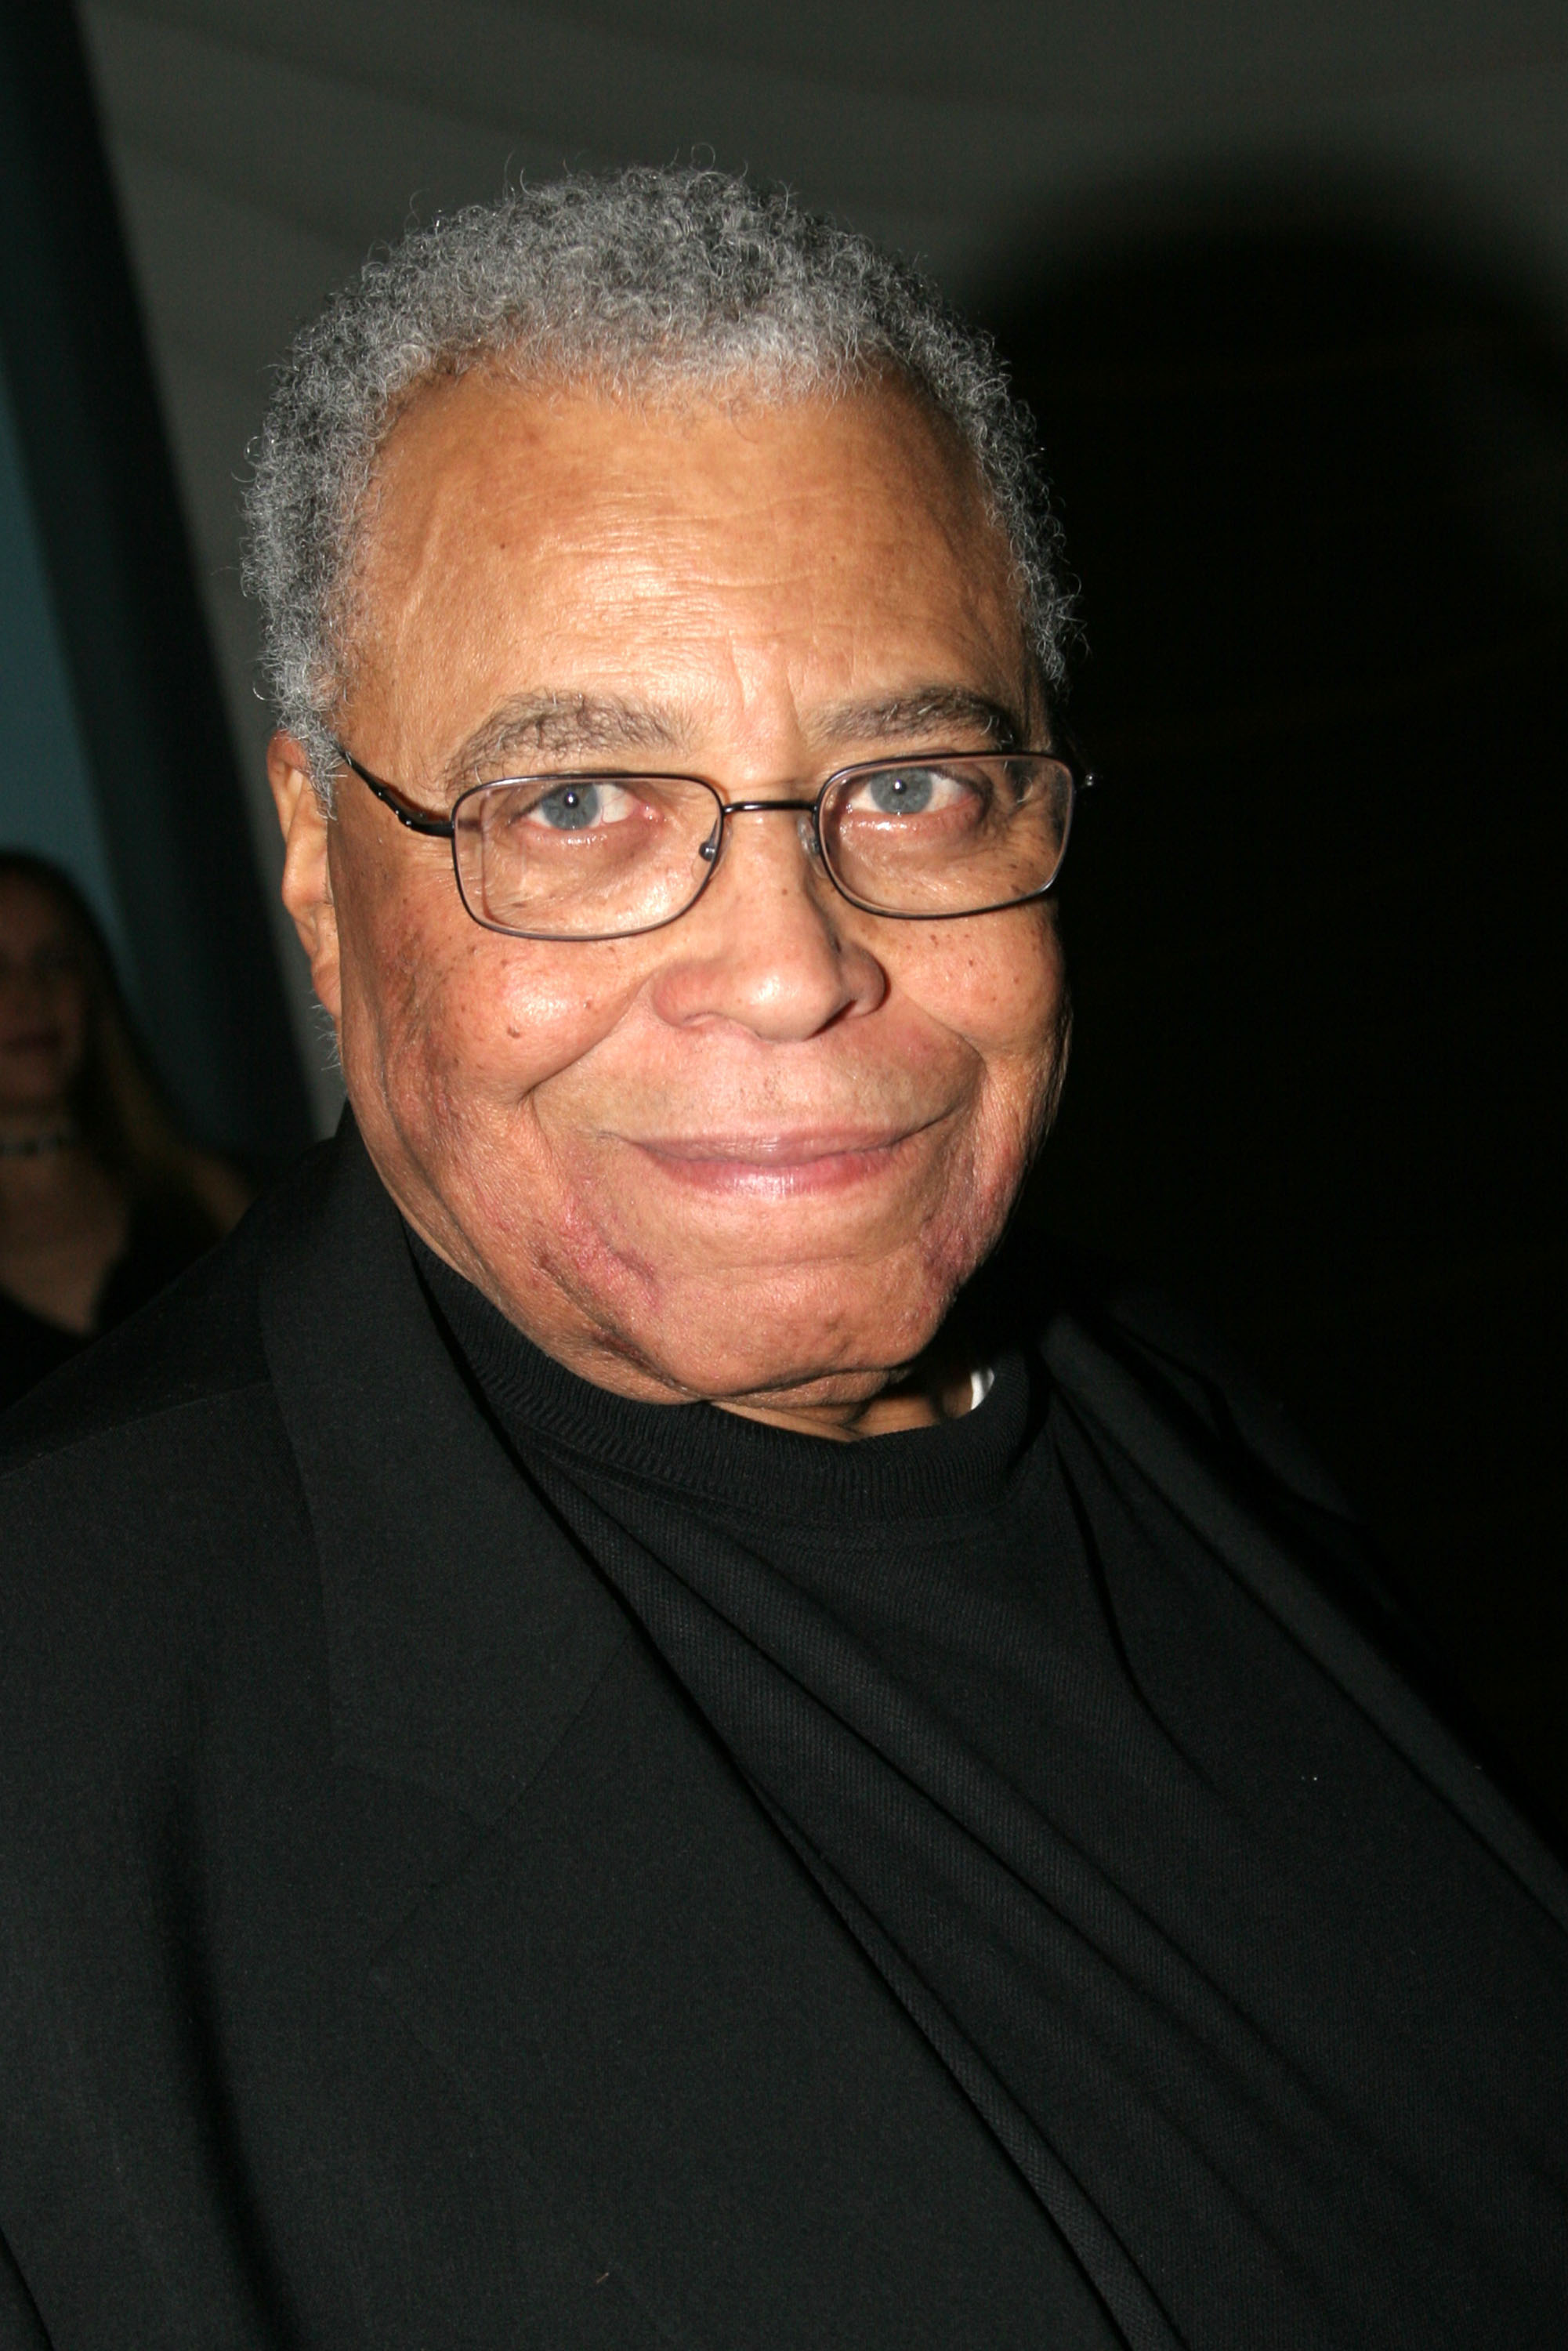 James Earl Jones at an event for On Golden Pond (1981)